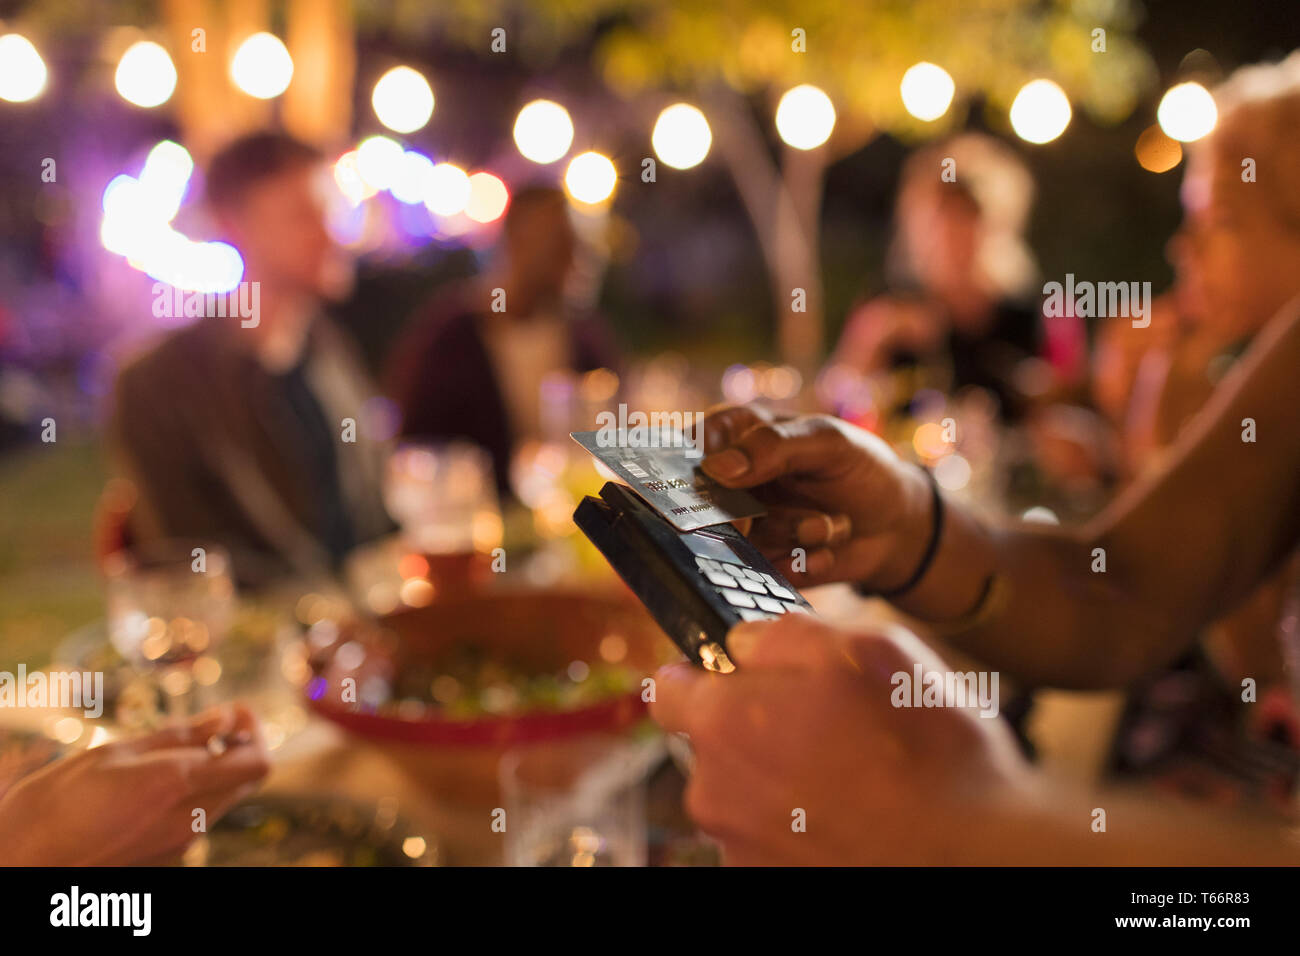 Woman paying for dinner with smart card on patio Stock Photo